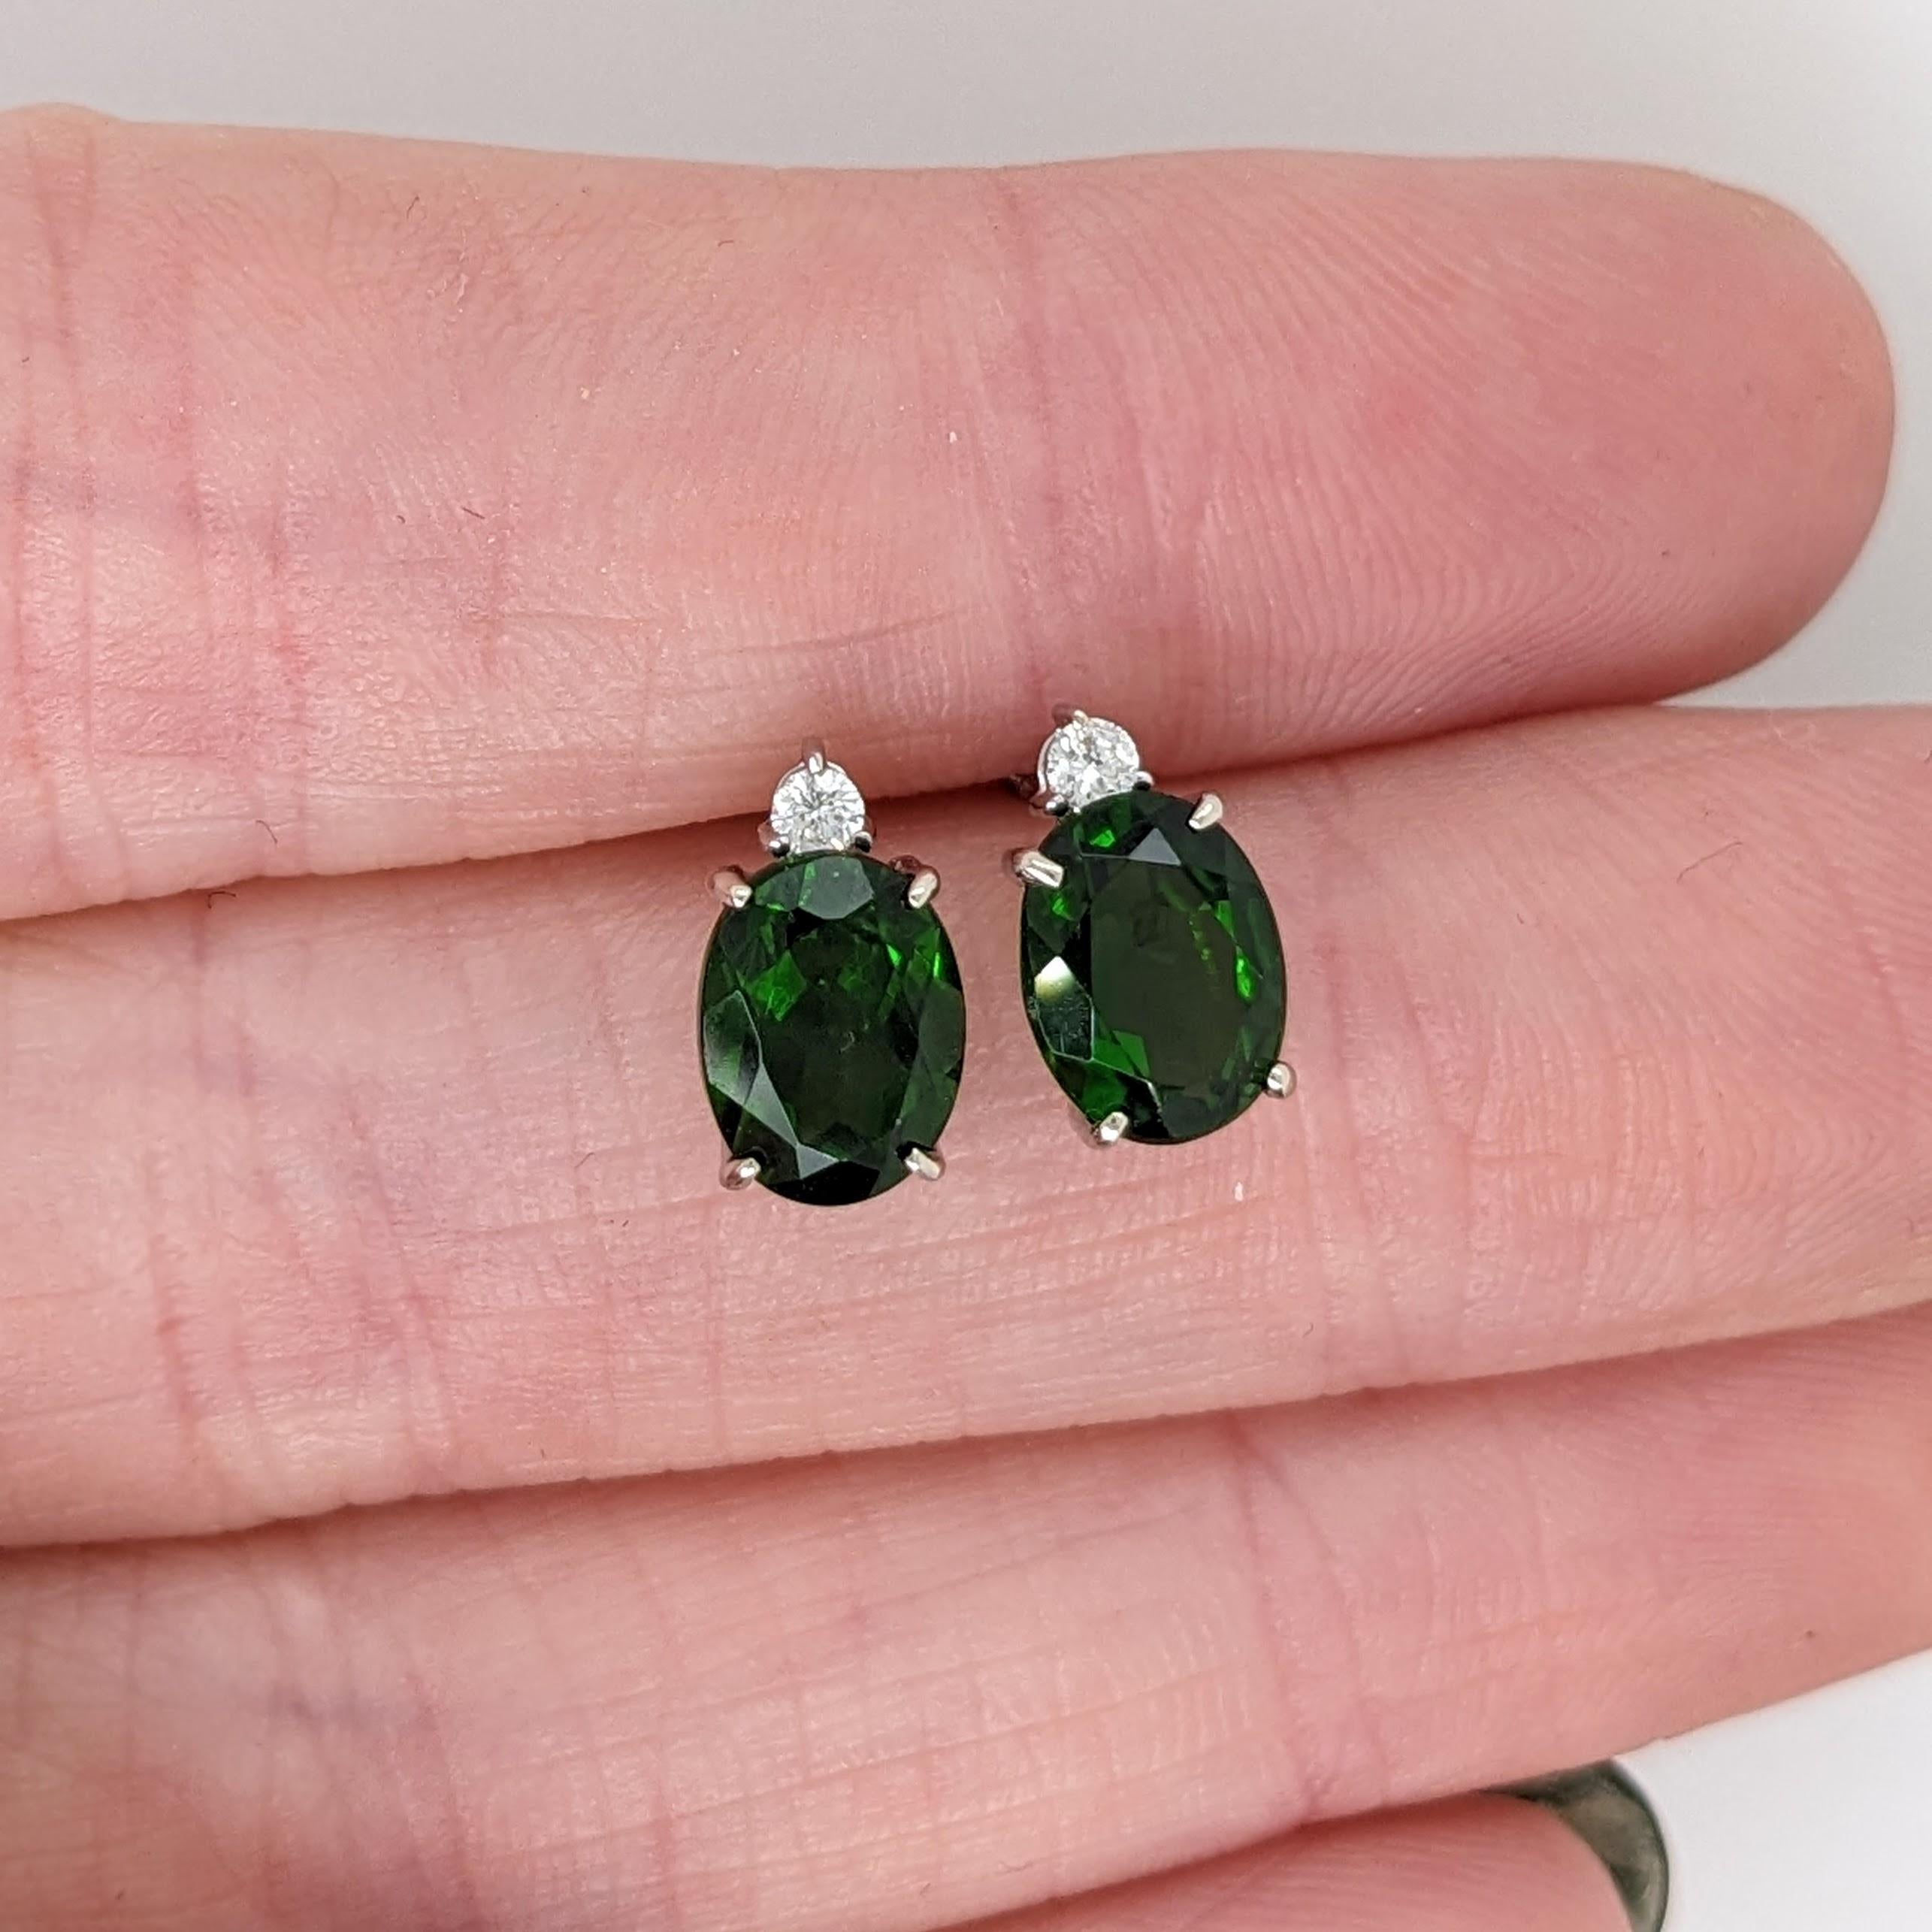 2.6ct Chrome Diopside Earrings w Natural Diamonds in Solid 14K Gold Oval 7x5mm